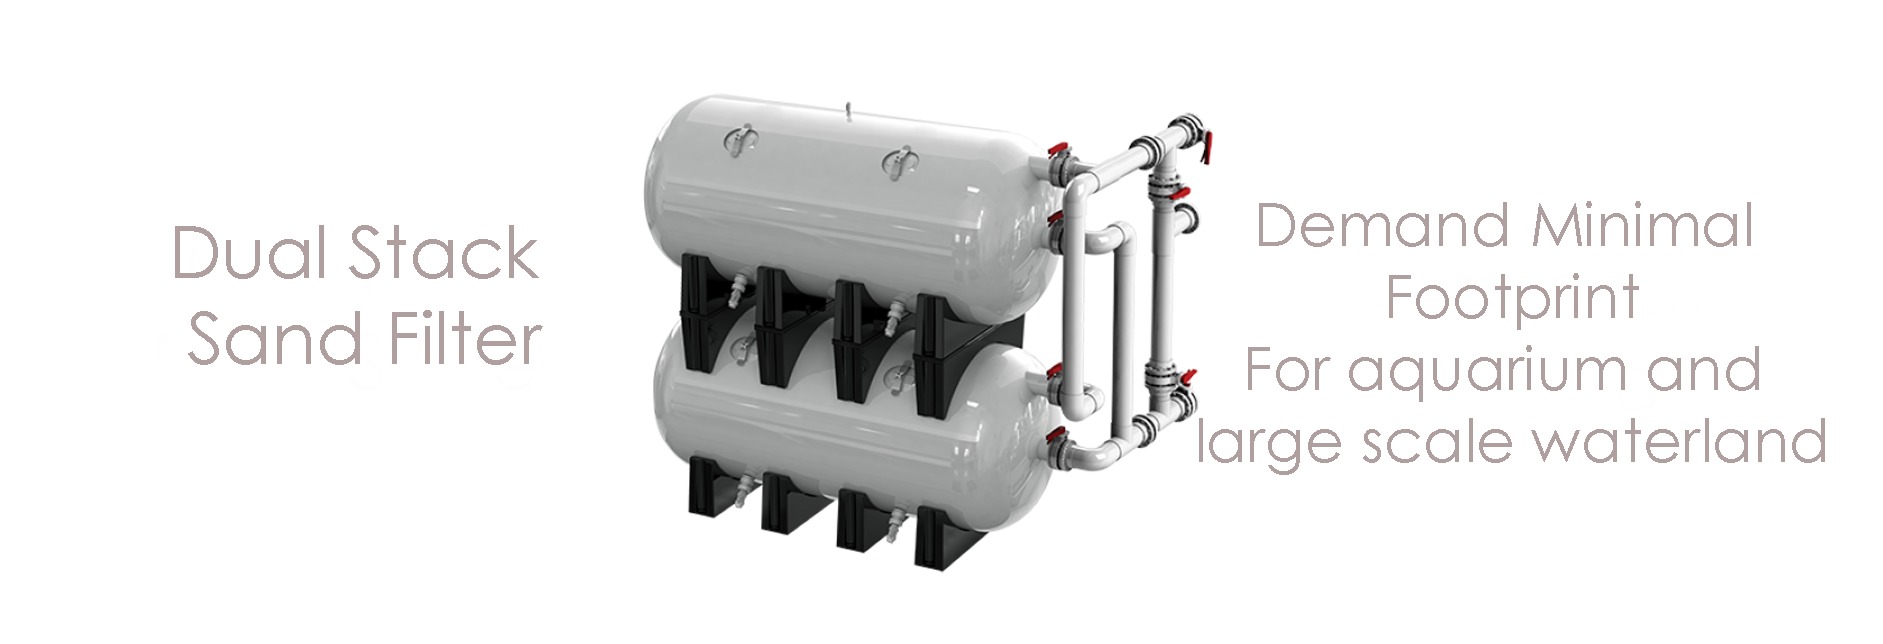 Dual Stack Sand Filter